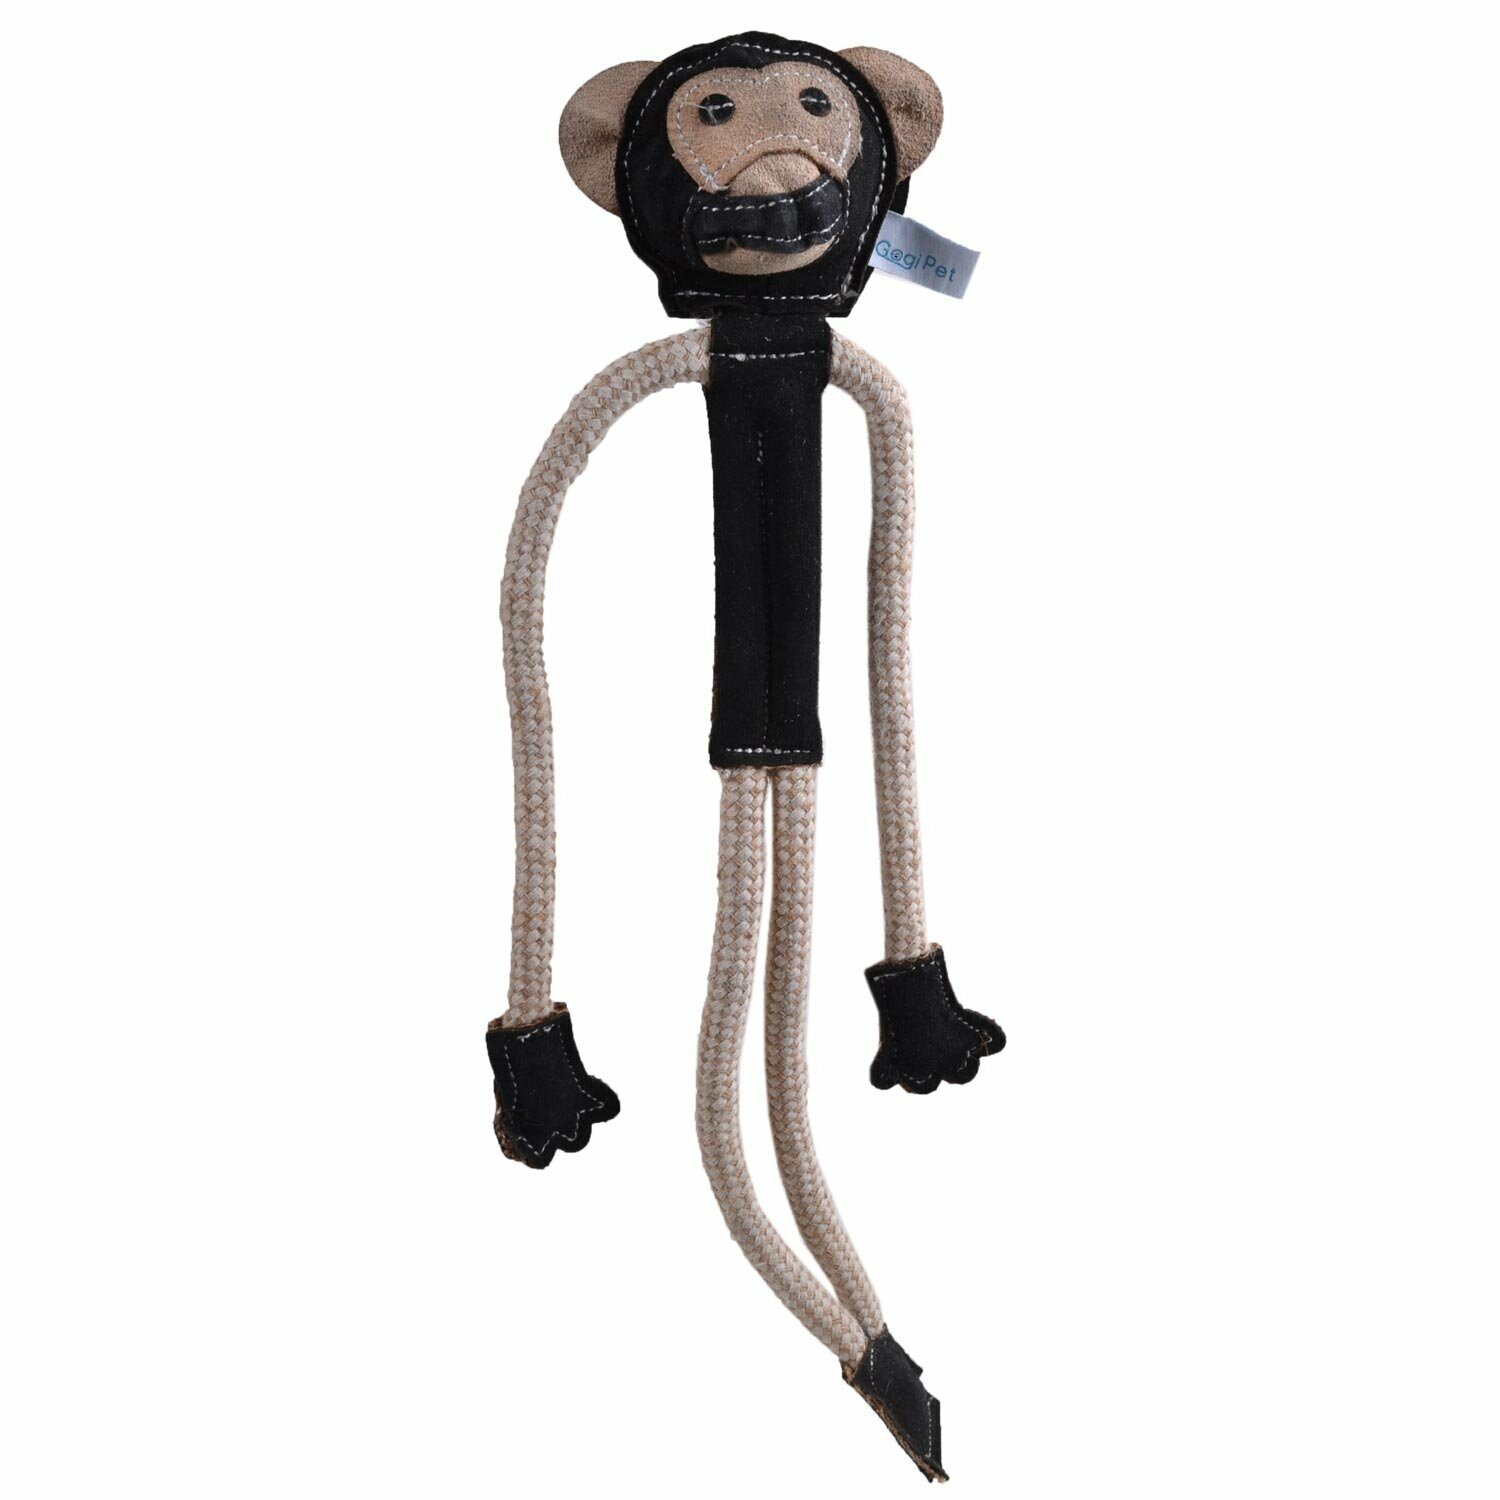 XL dog toy from natural raw materials of GogiPet - Black chimp